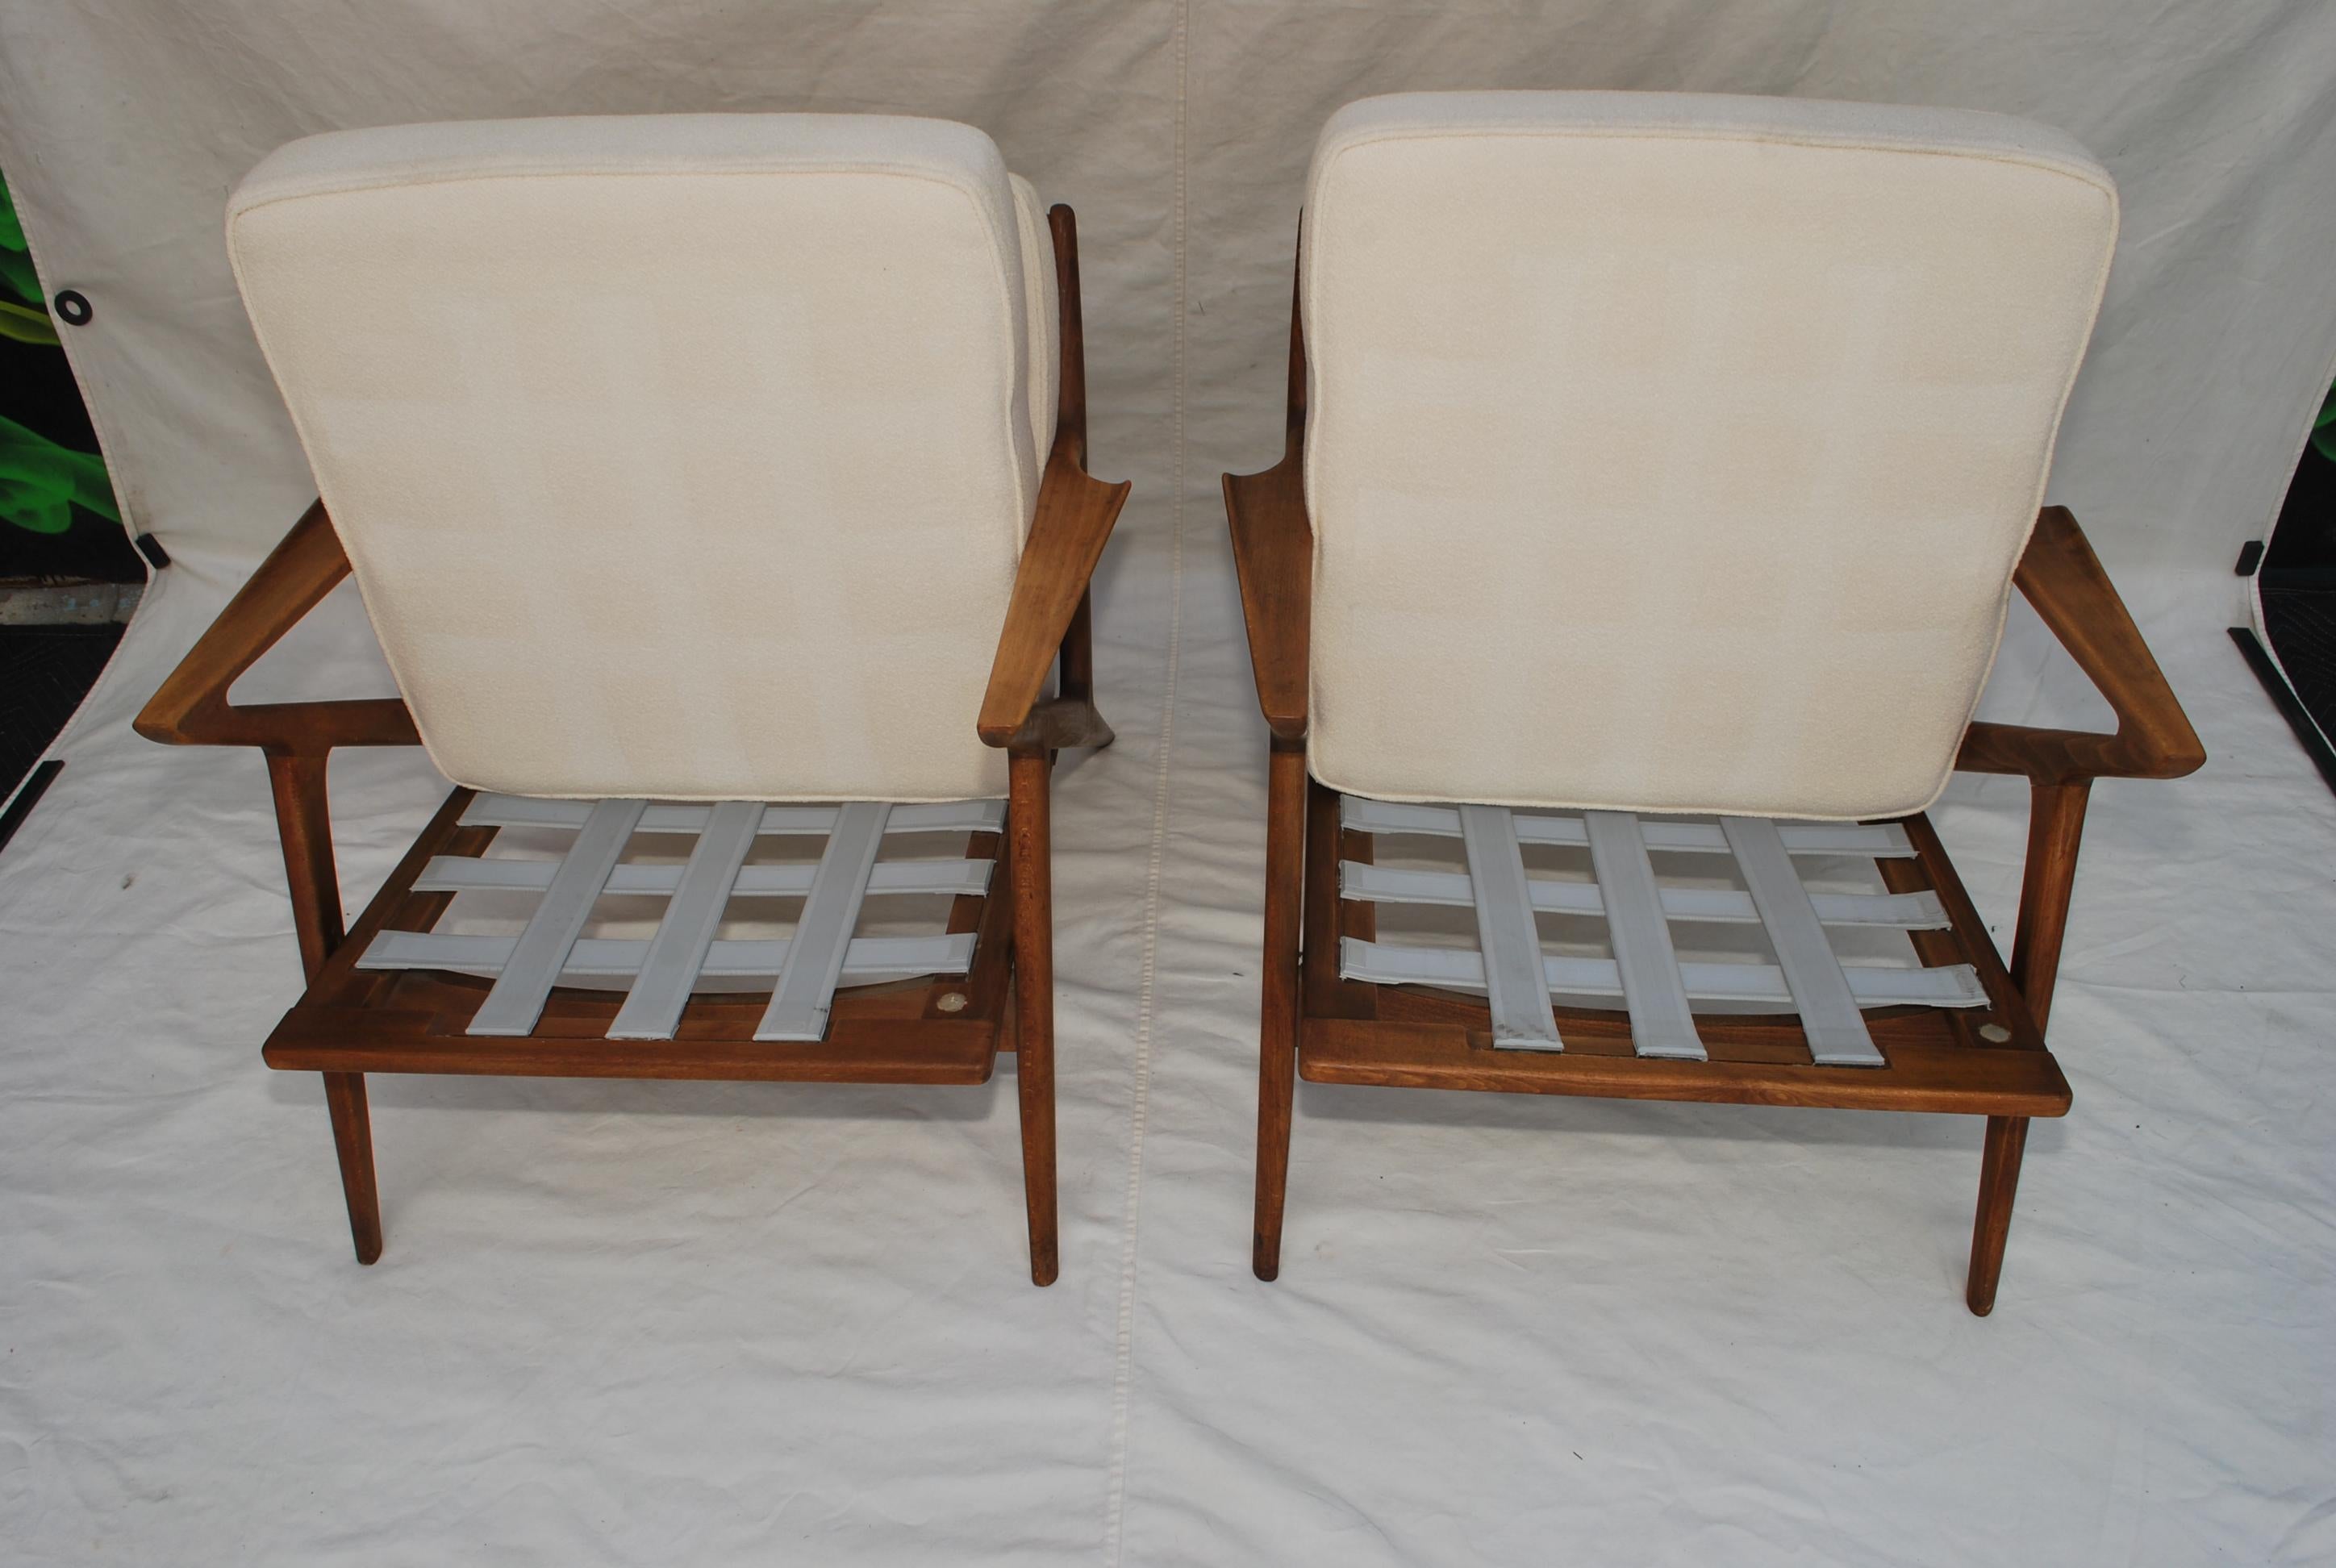 Mid-20th Century Sexy Pair of 1960's Chairs Design by Poul Jesnsen the Z Chairs Design